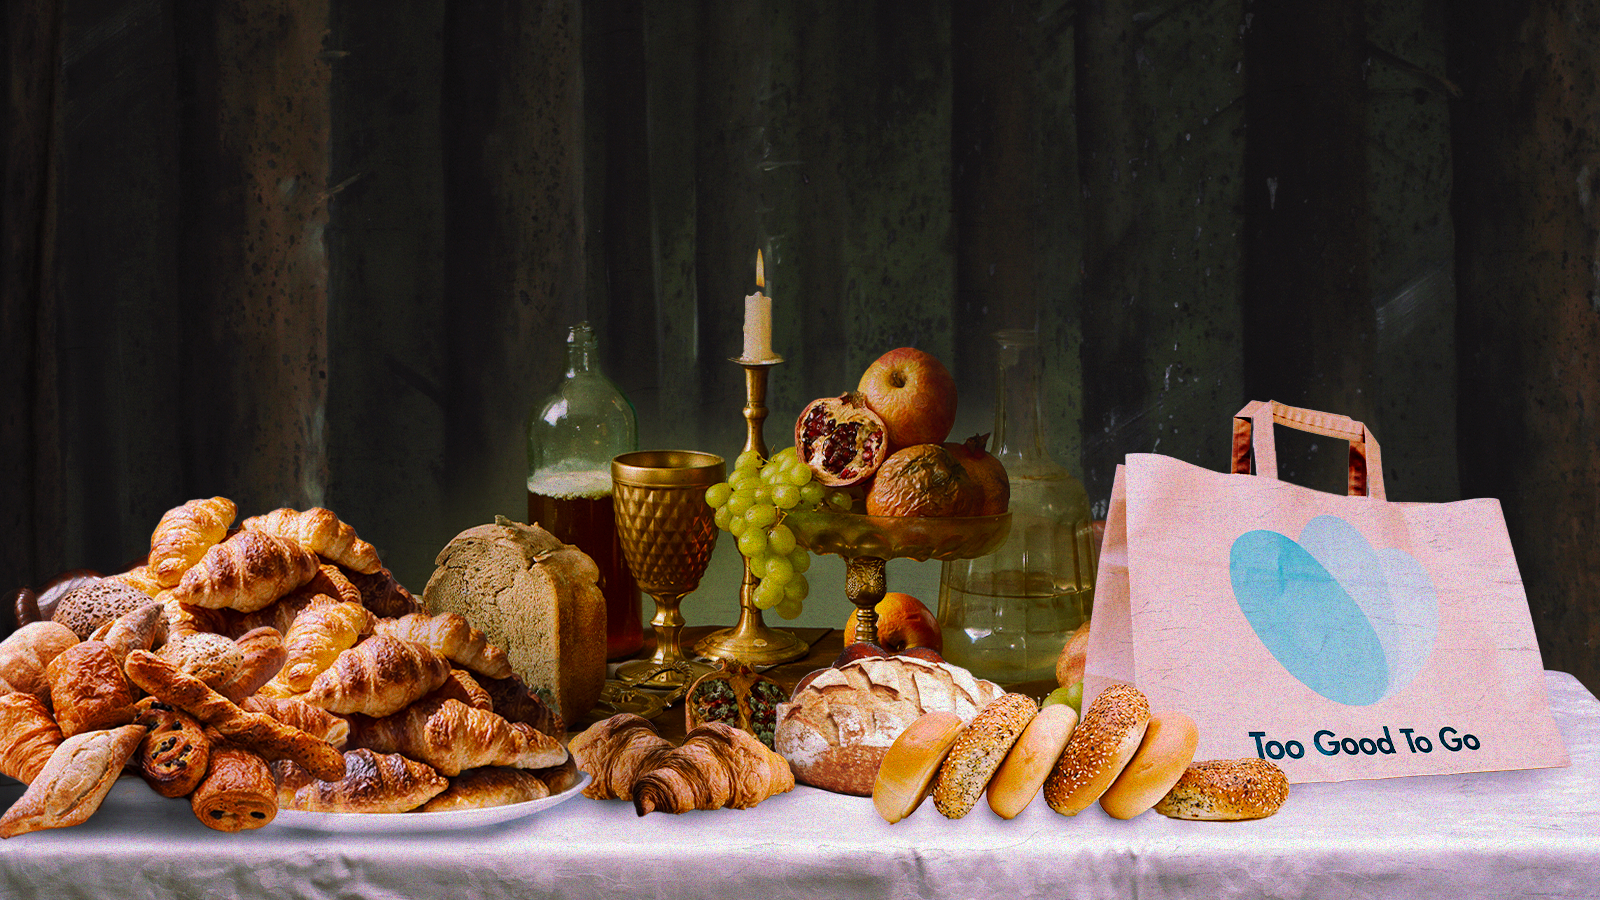 Renaissance-style painting of a tablescape with fruit and cakes, with a pile of bagels, pastries, and a bag with “Too Good To Go” written on it photo-imposed on top.